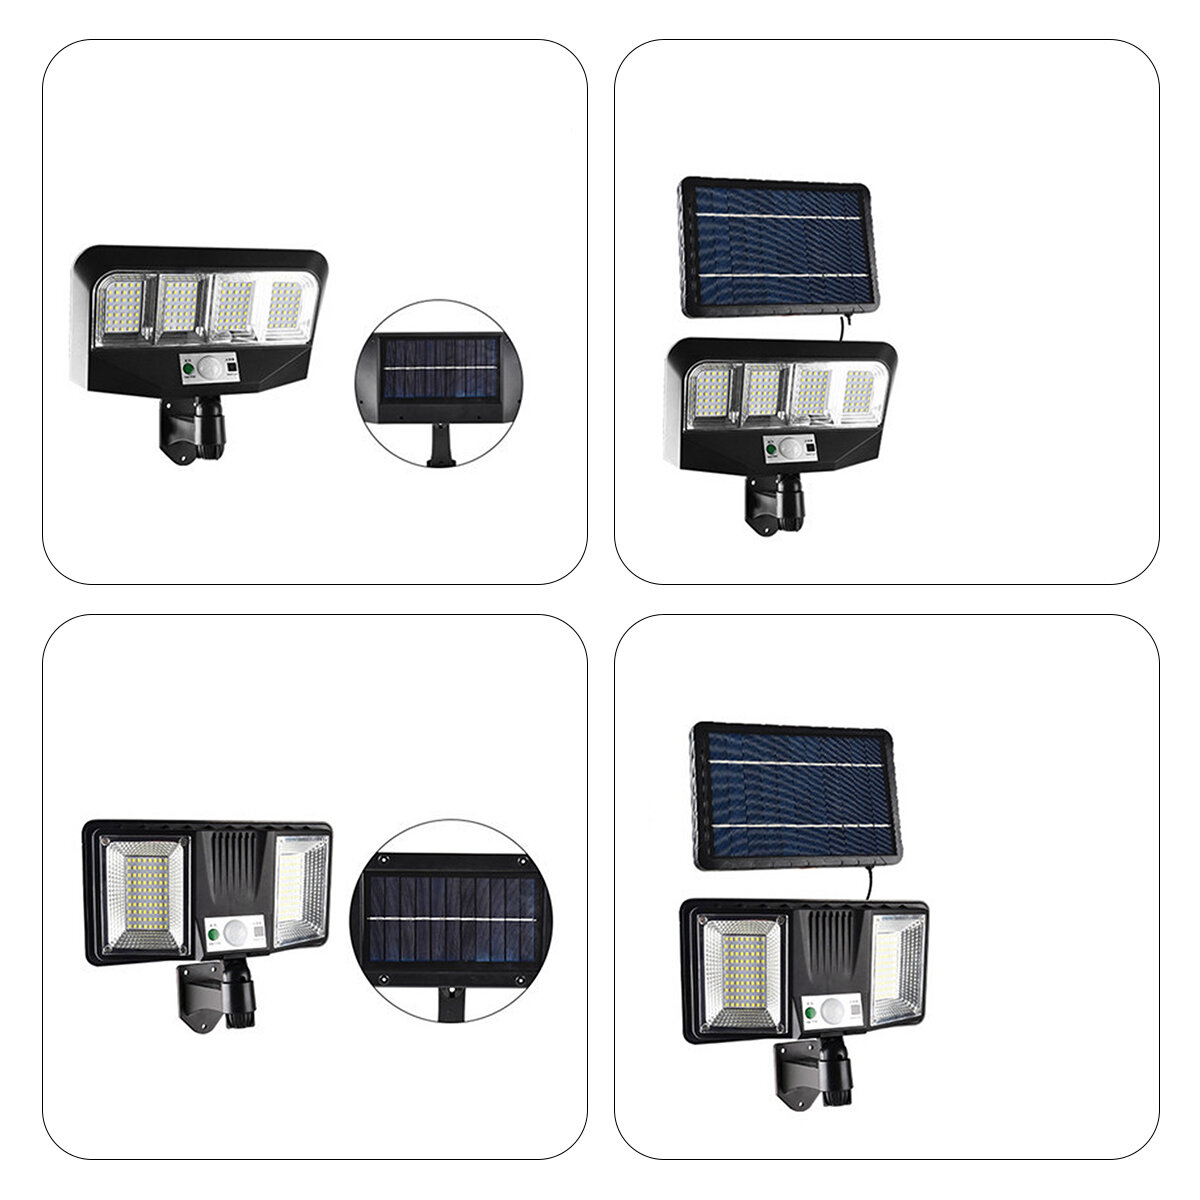 Solar Lights Split Induction Lights with Remote Control LED Wall Lights Super Bright Outdoor Camping Patio Lighting Garden COD